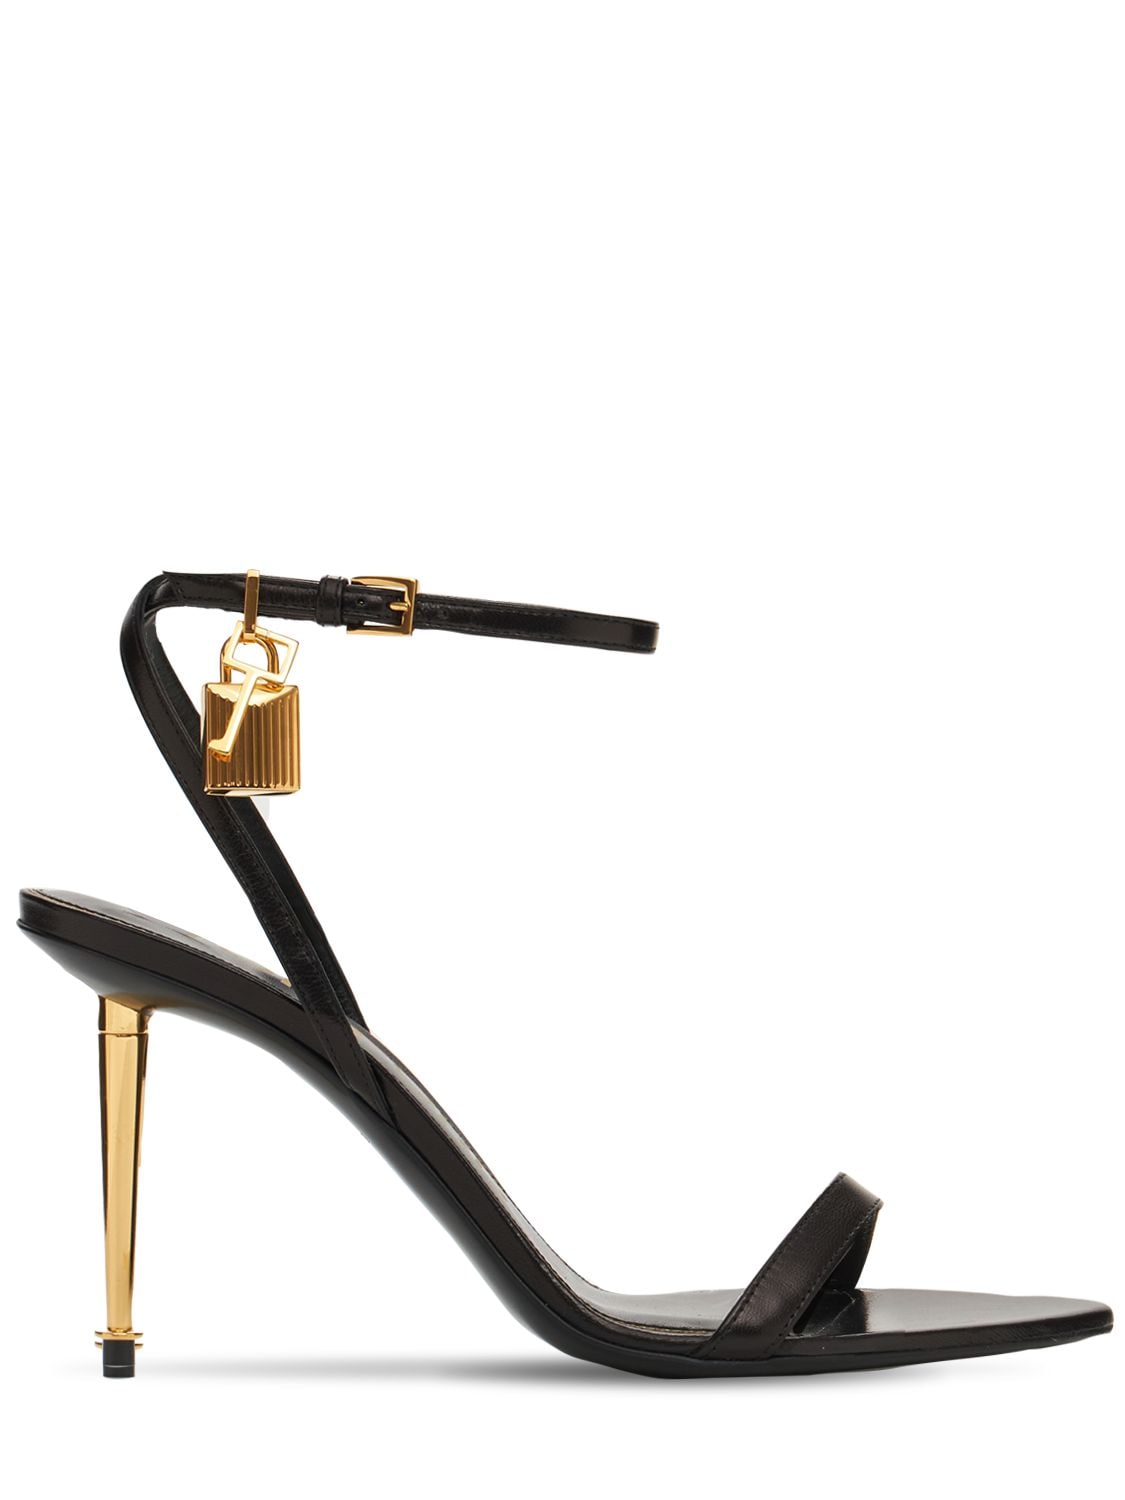 TOM FORD 85mm Padlock Leather Sandals